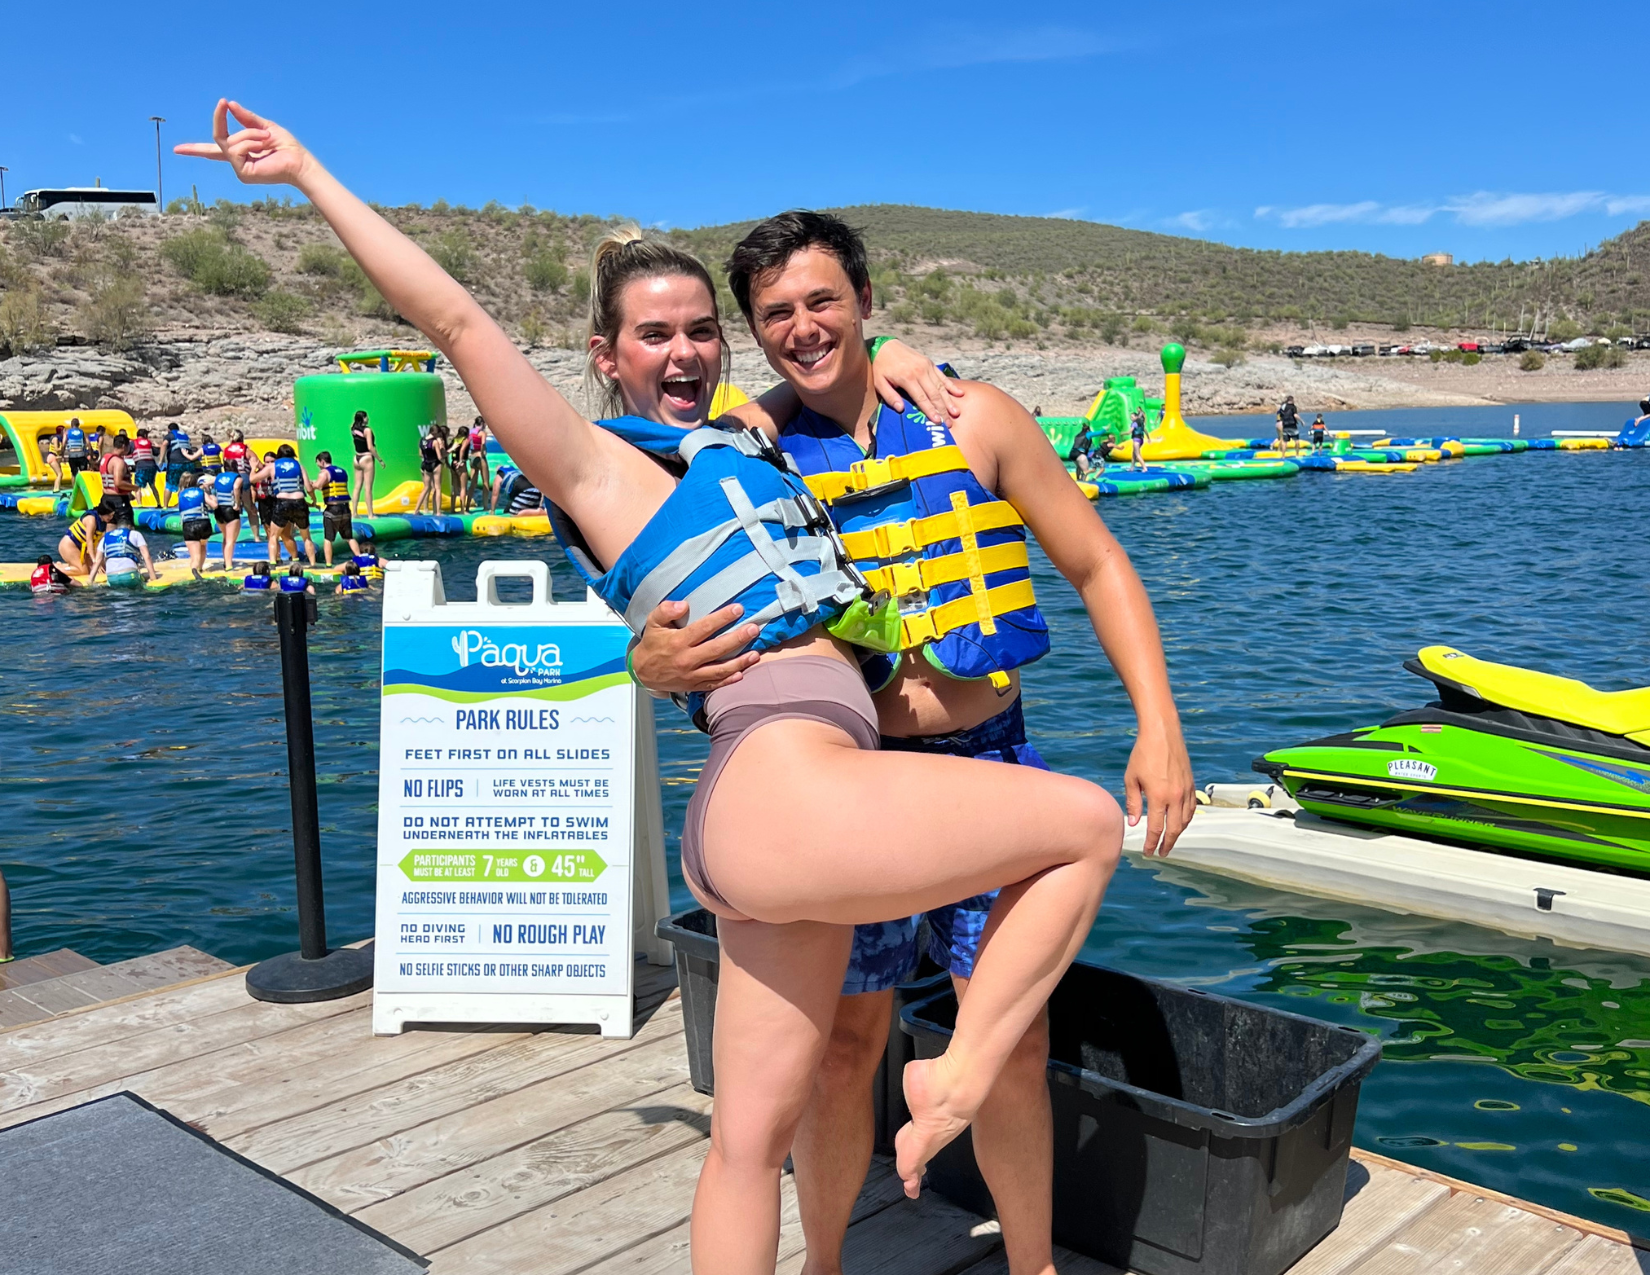 Lacy Cain Baranack and her husband posing in front of a water obstacle course on Lake Pleasant outside of Phoenix, Arizona